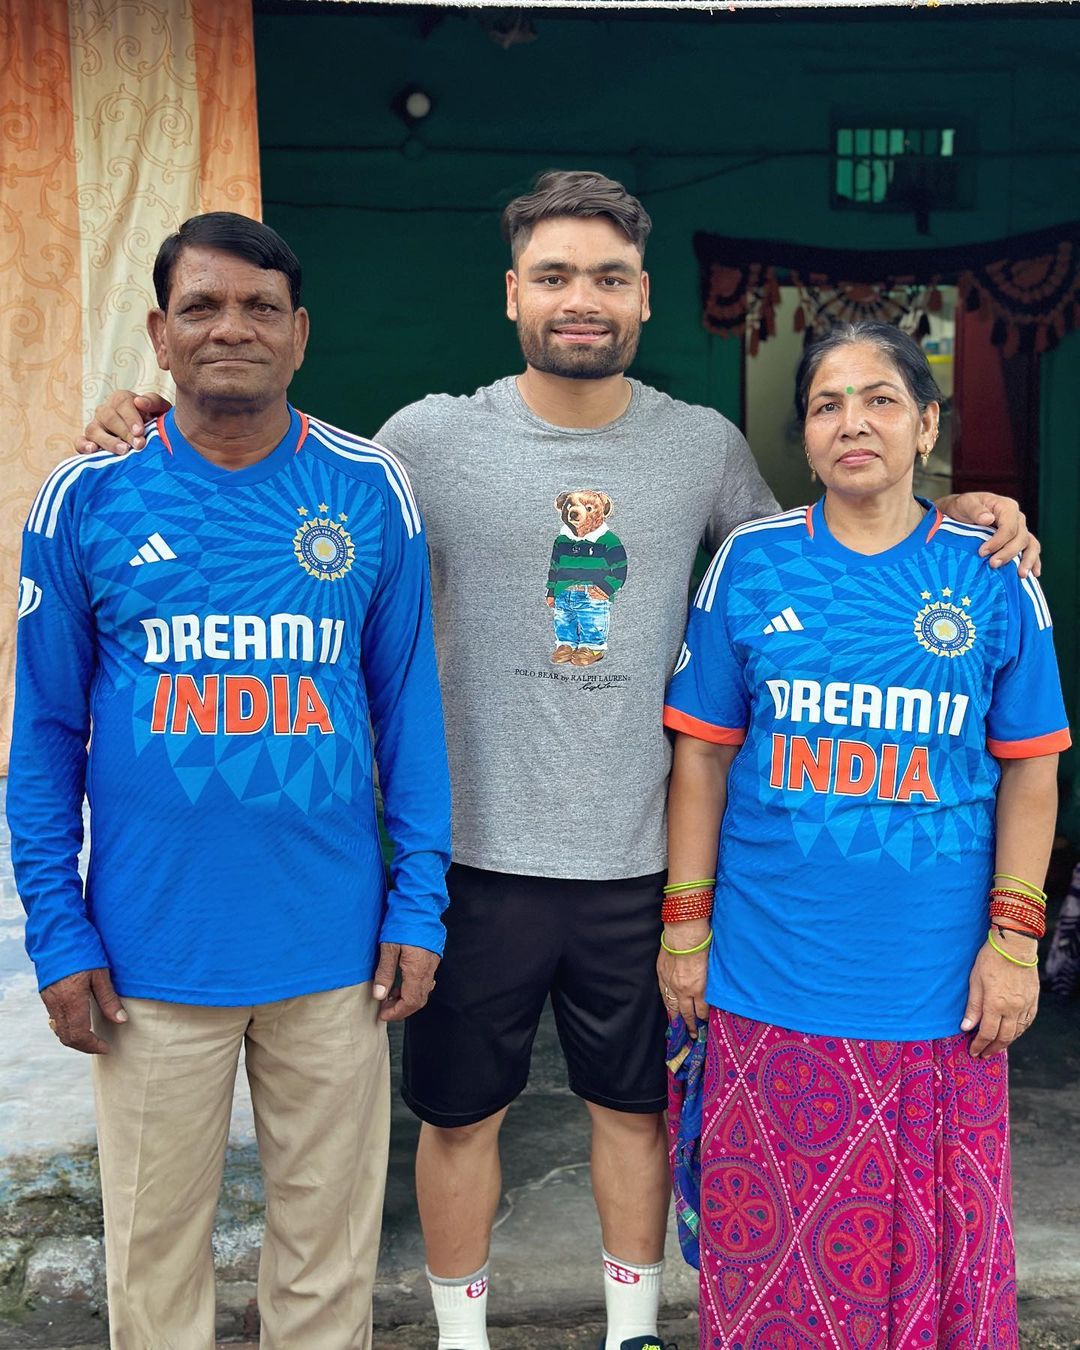 Rinku Singh with his parents who are wearing Team India's jersey after his national team debut